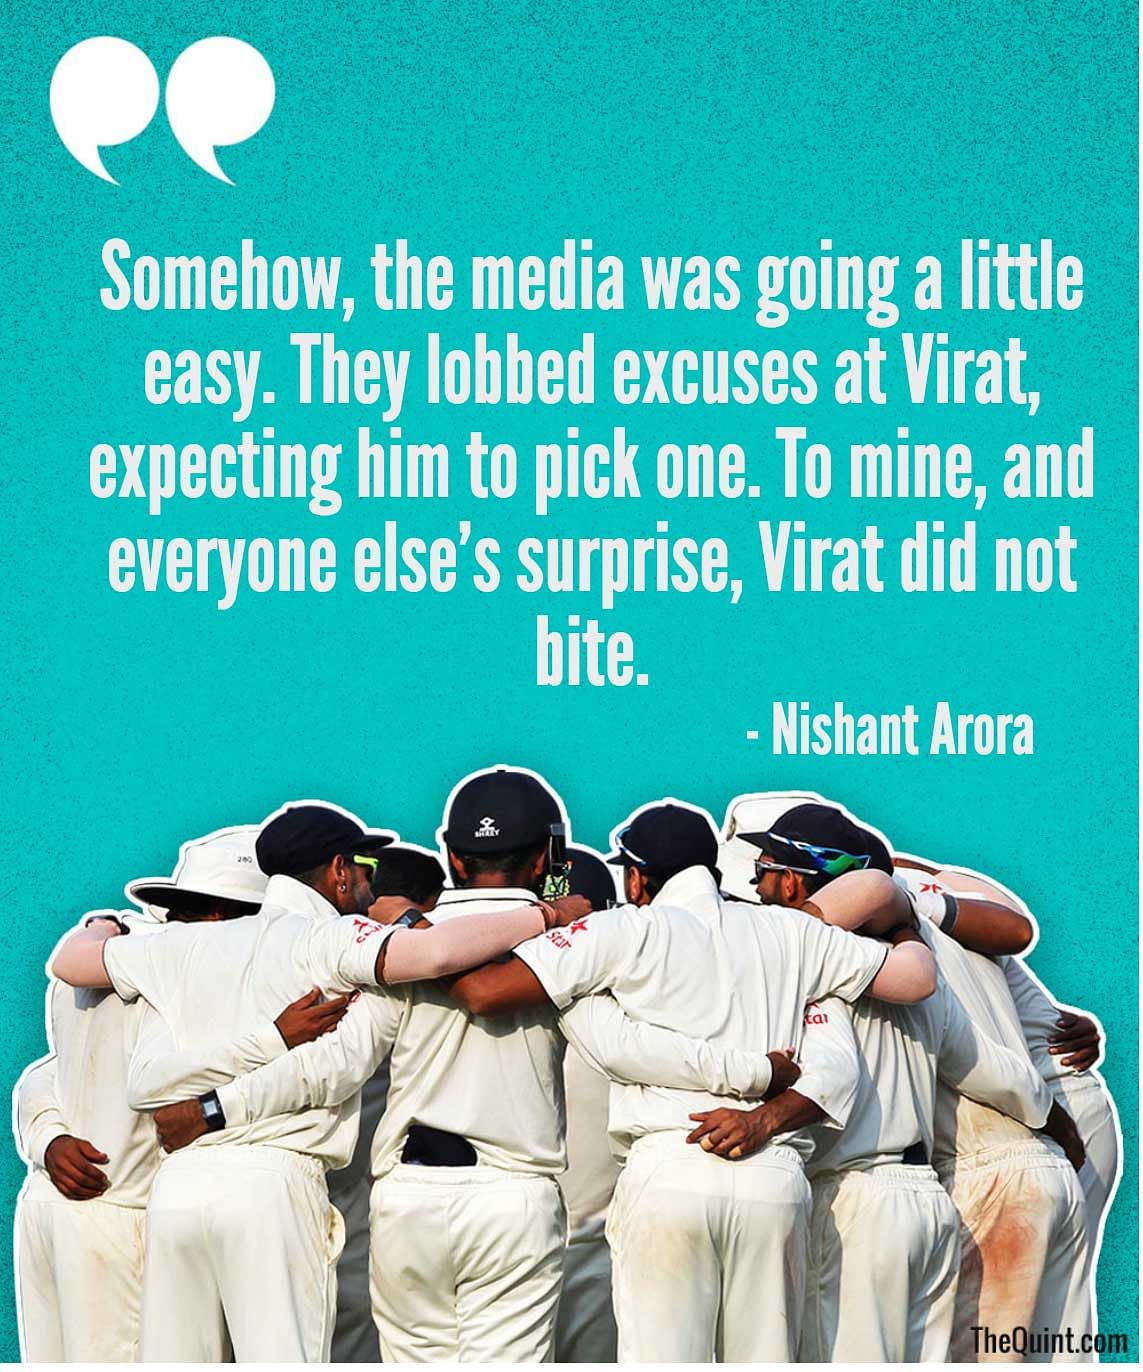 On 15 August 2015, Virat & his men liberated themselves from inner & outer restrictions, writes Nishant Arora.